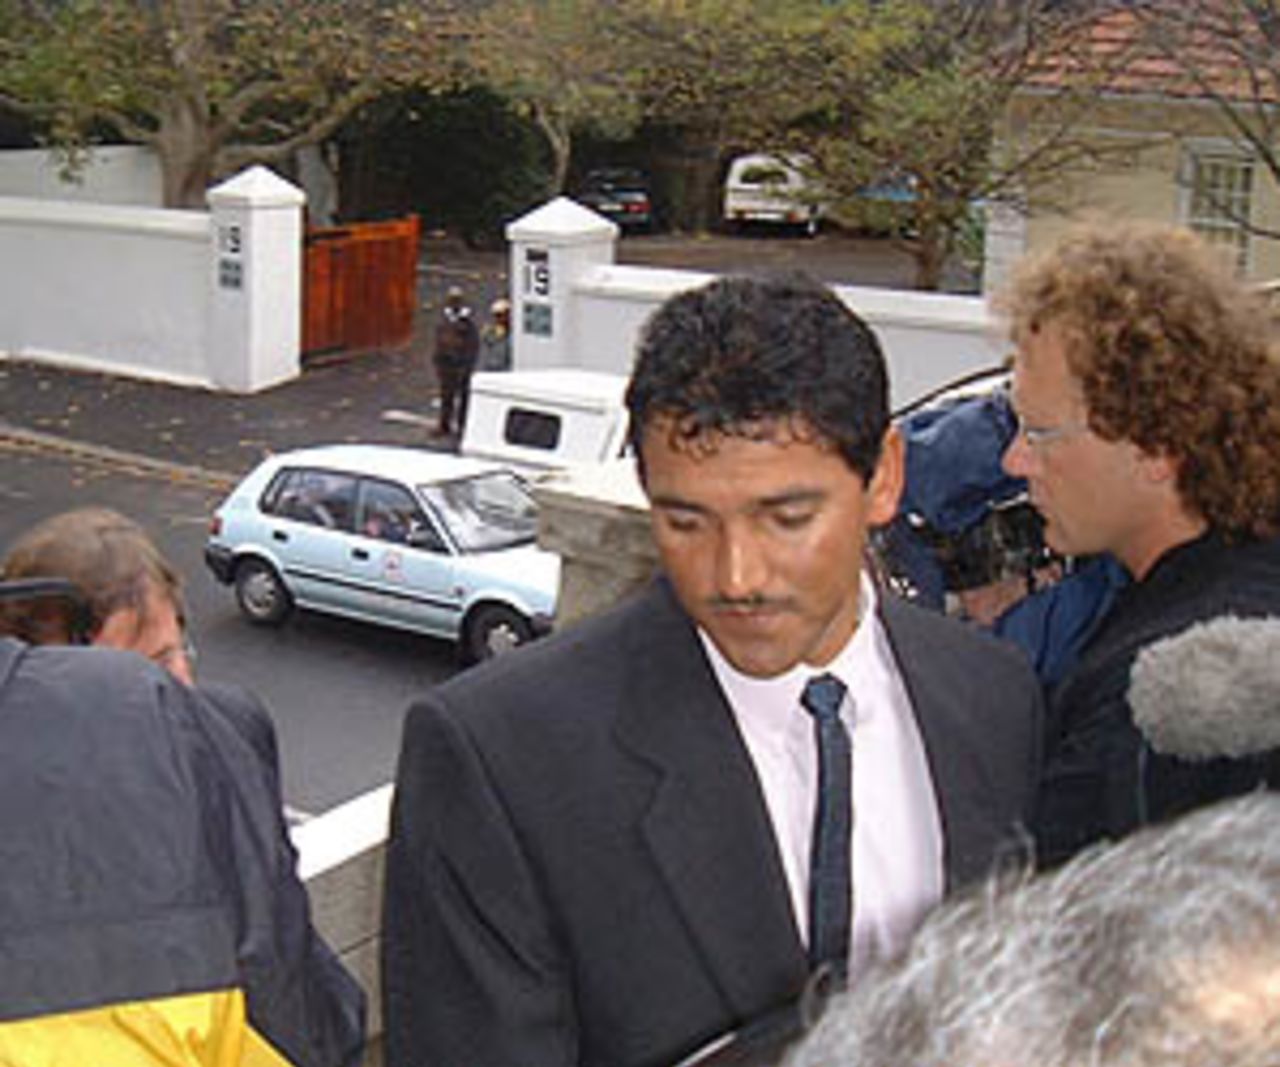 Henry Williams on his way to reveal more on the match-fixing scandal, Friday 9, June 2000.